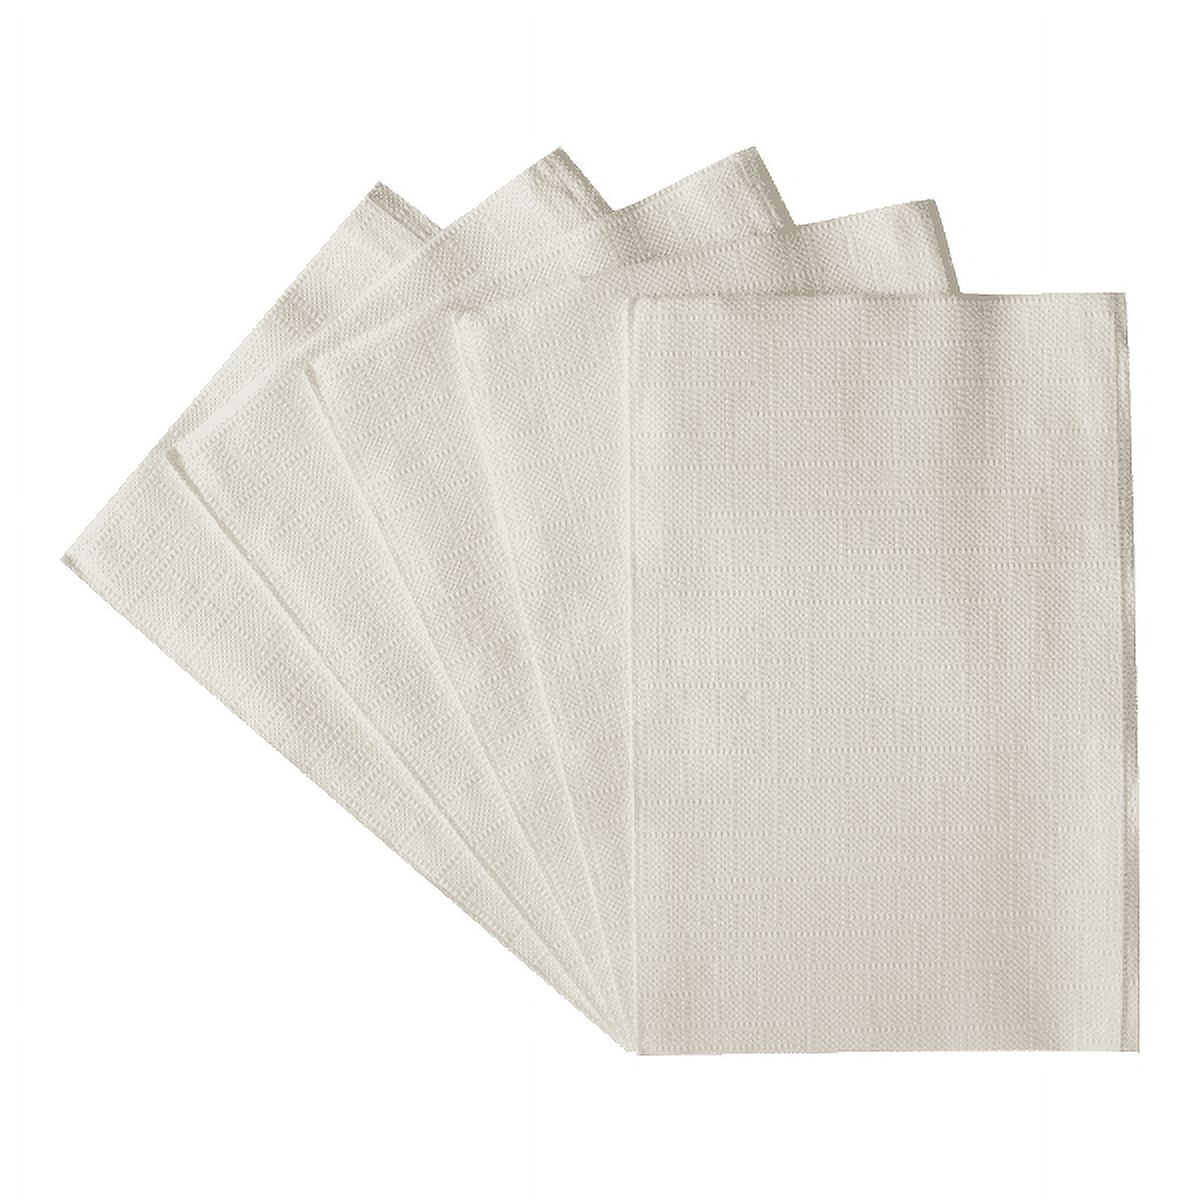 Napkins White Paper USA MADE! 150 ct. 13.25X10.25. An Incredible Value!  Excellent Quality Napkins. Healthy Napkins are FSC Approved & FREE from  Ink